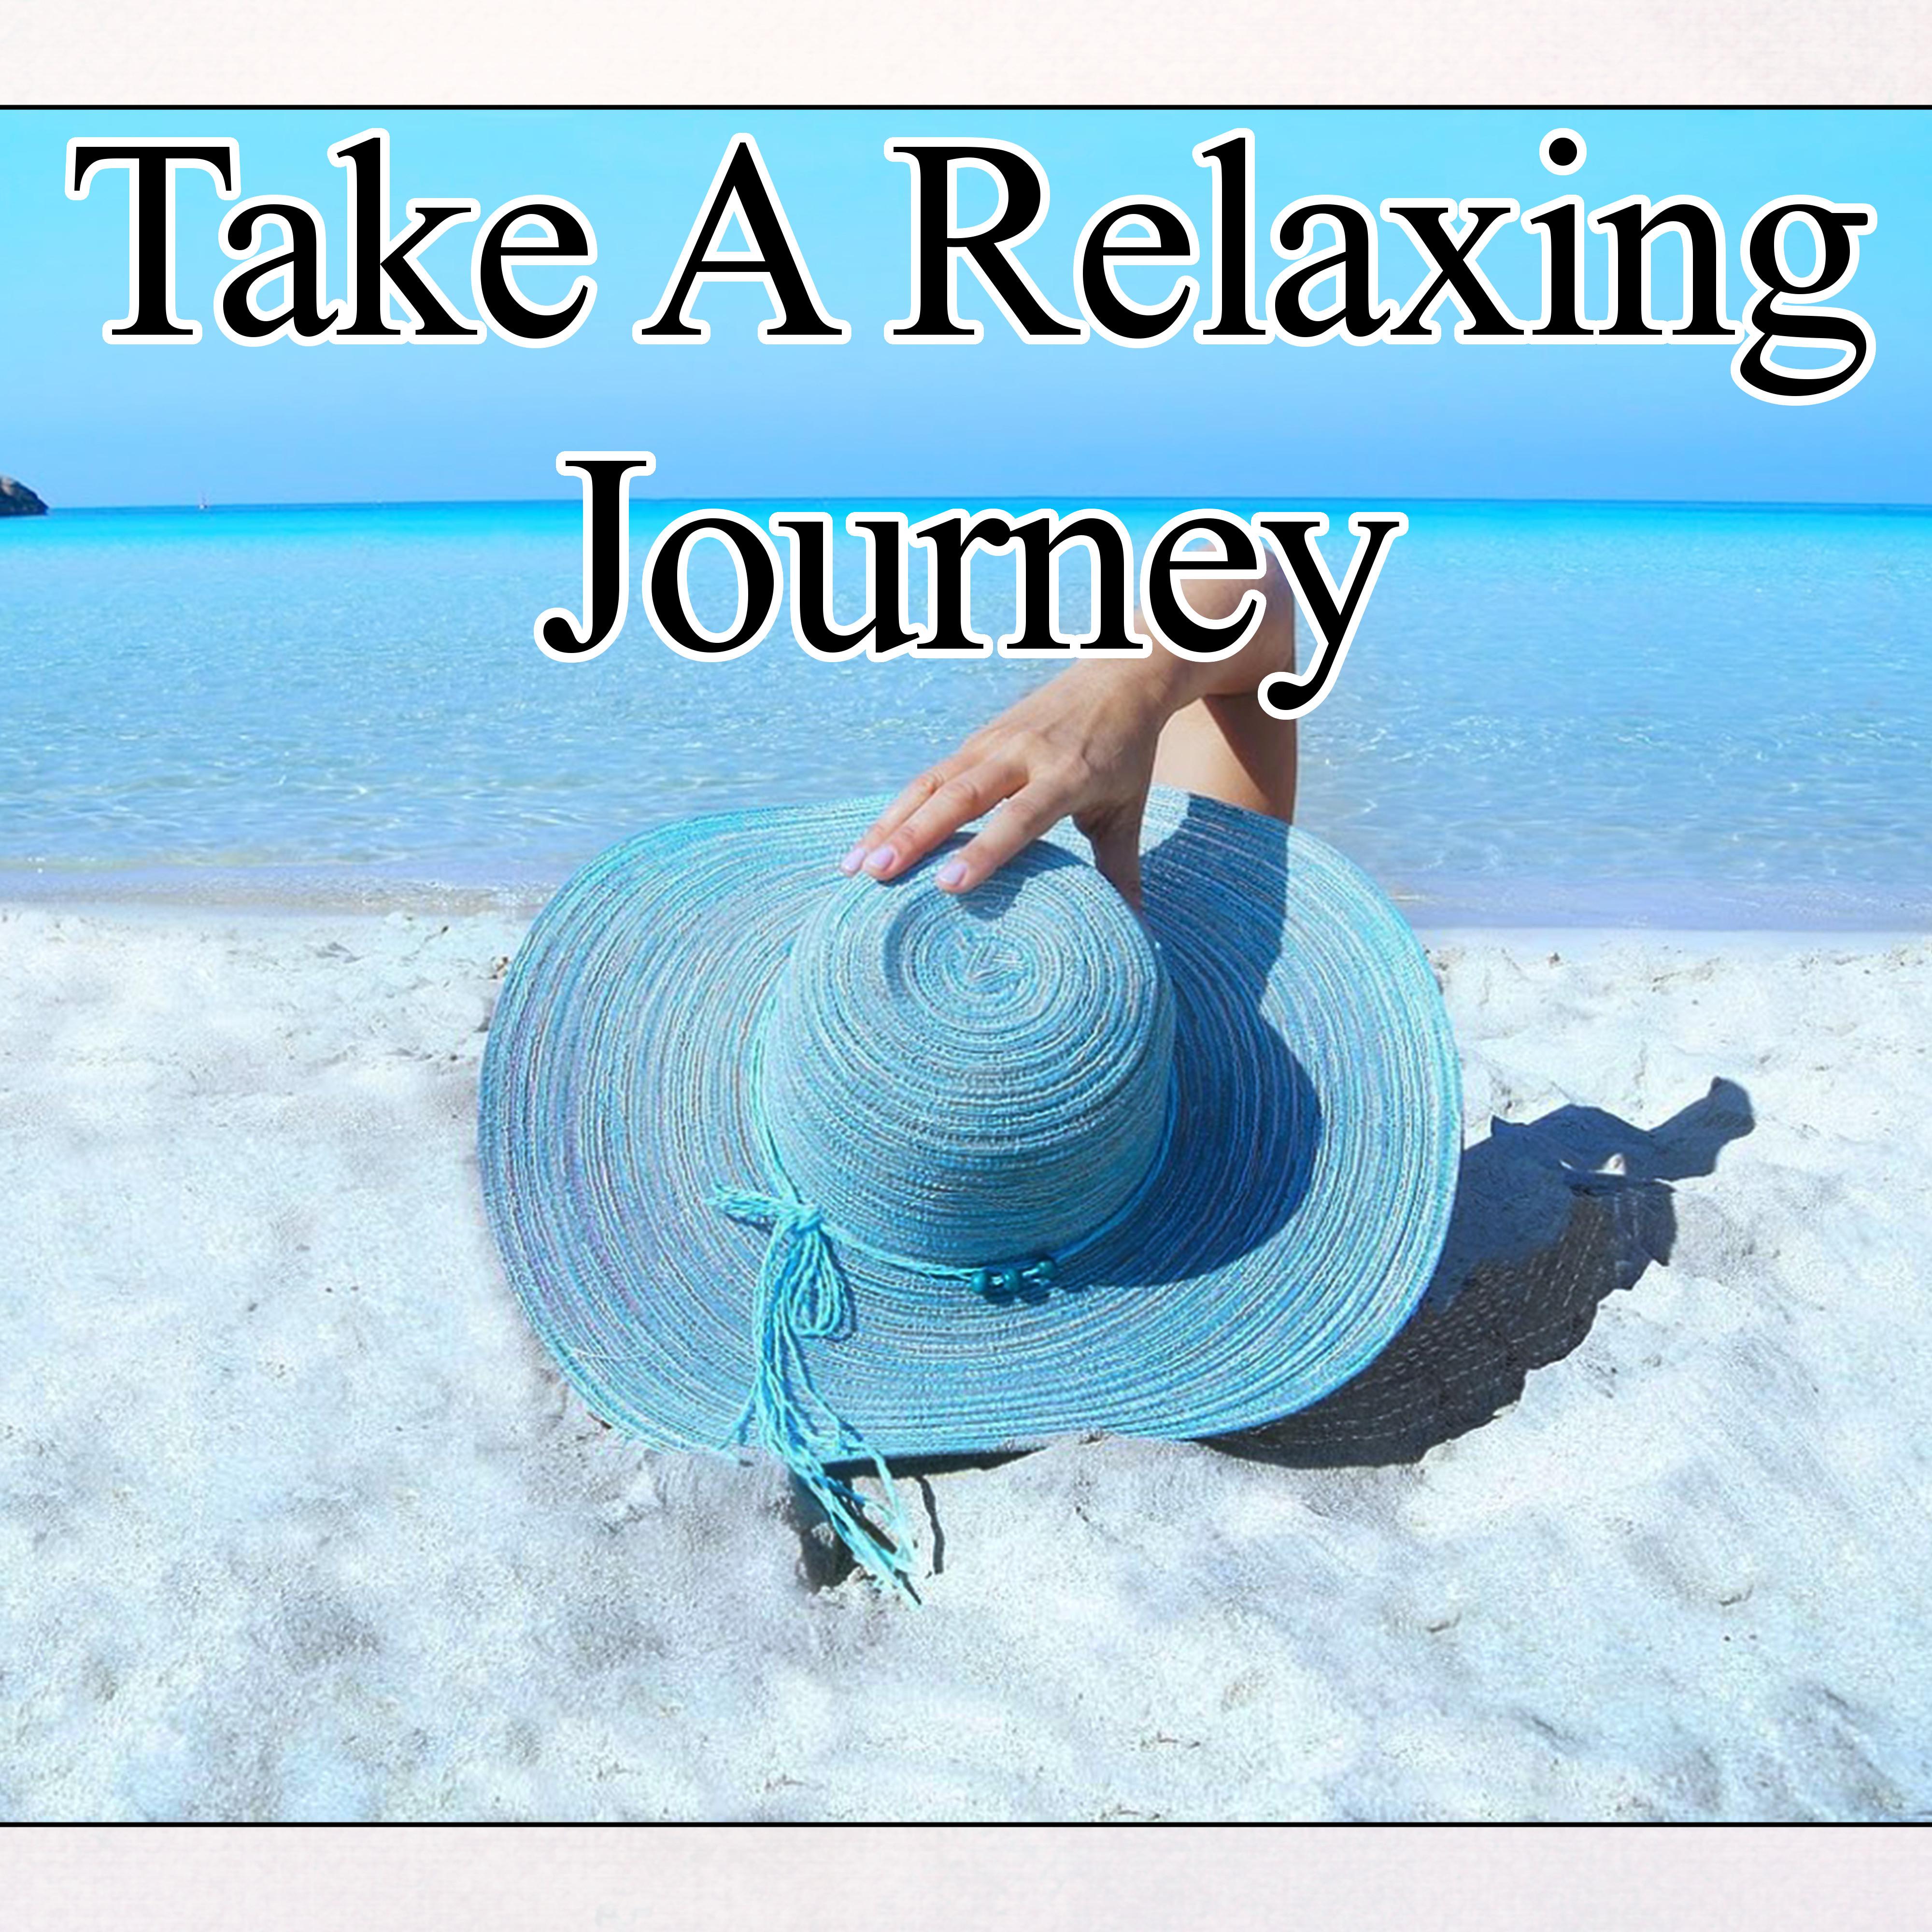 Take A Relaxing Journey - Restful Sleep Relieving Insomnia, Sleep Music to Help You Relax all Night, Serenity Lullabies with Relaxing Nature Sounds, Healing Massage, New Age, Deep Sleep Music